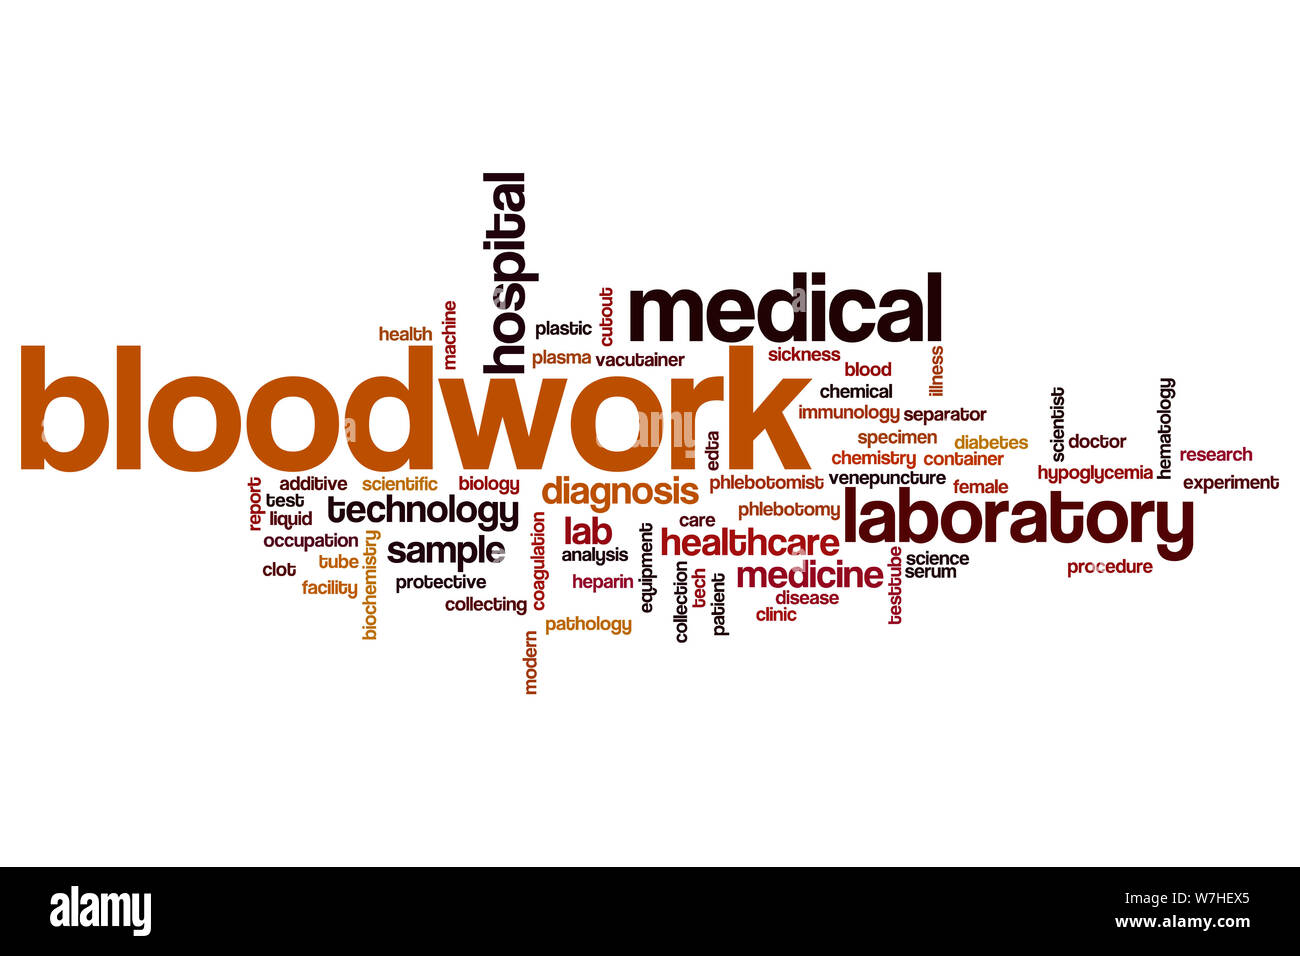 Bloodwork word cloud concept Stock Photo